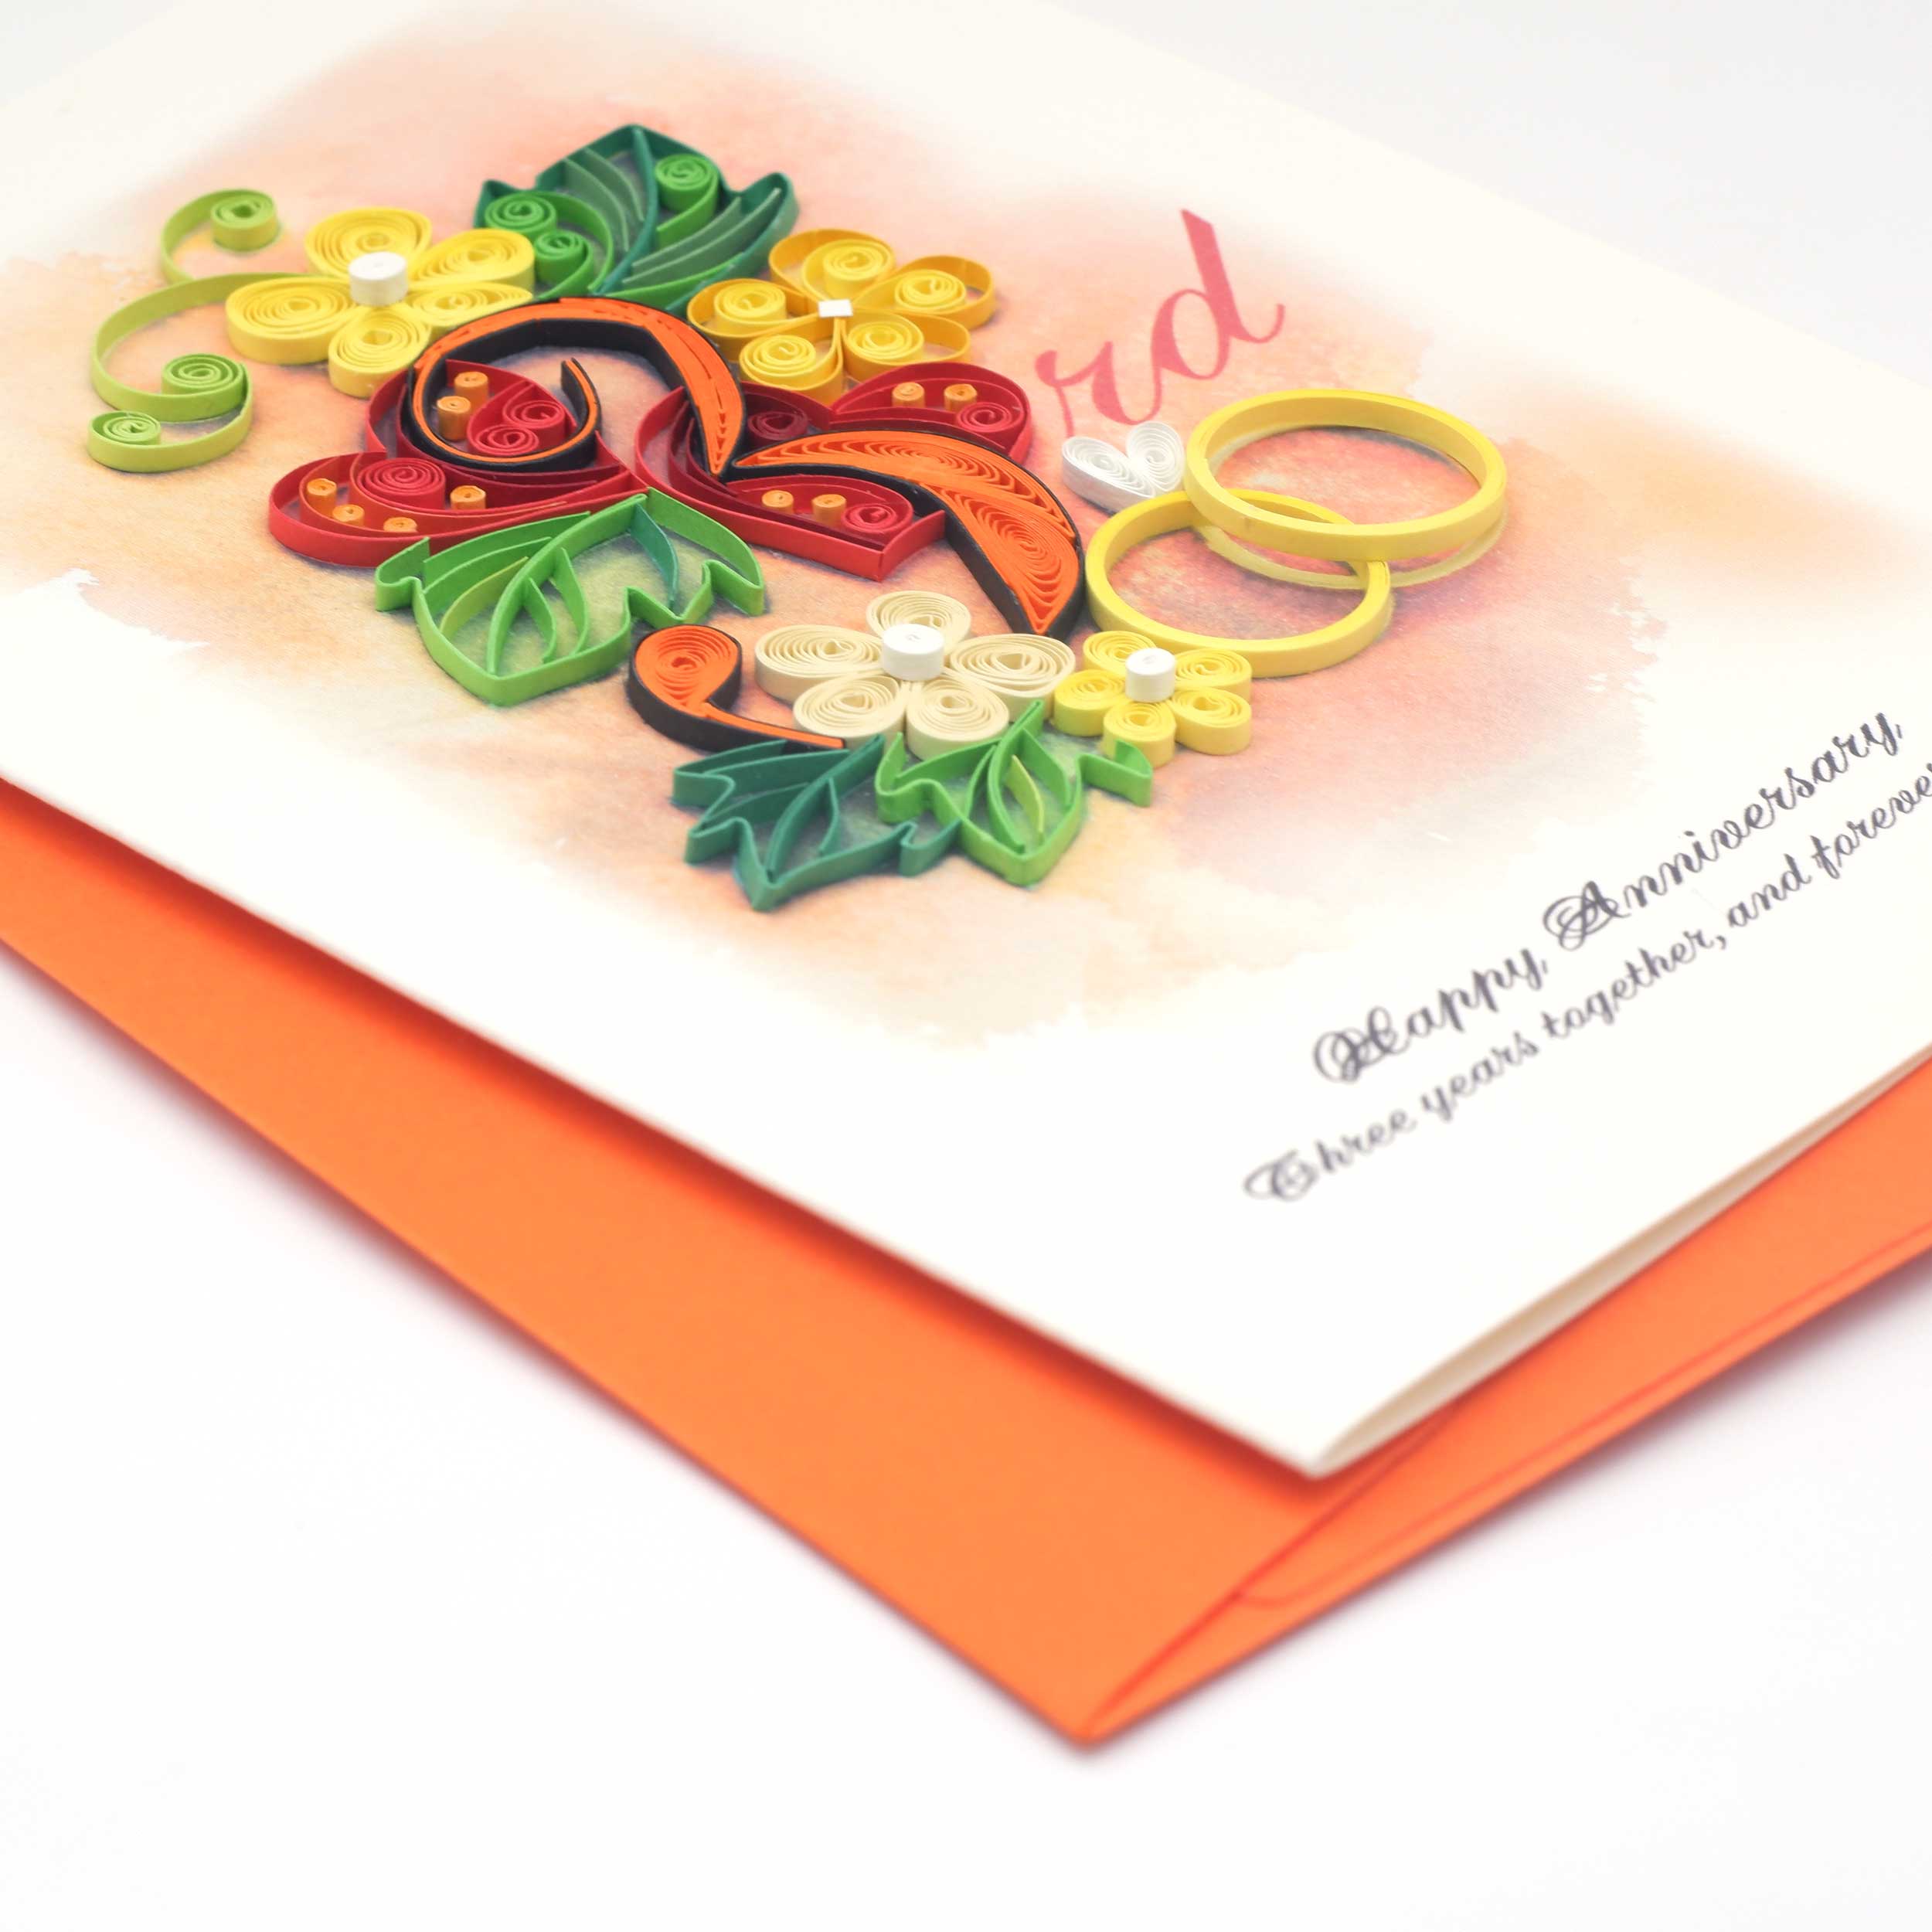 QUILLING 3RD ANNIVERSARY GREETING CARD